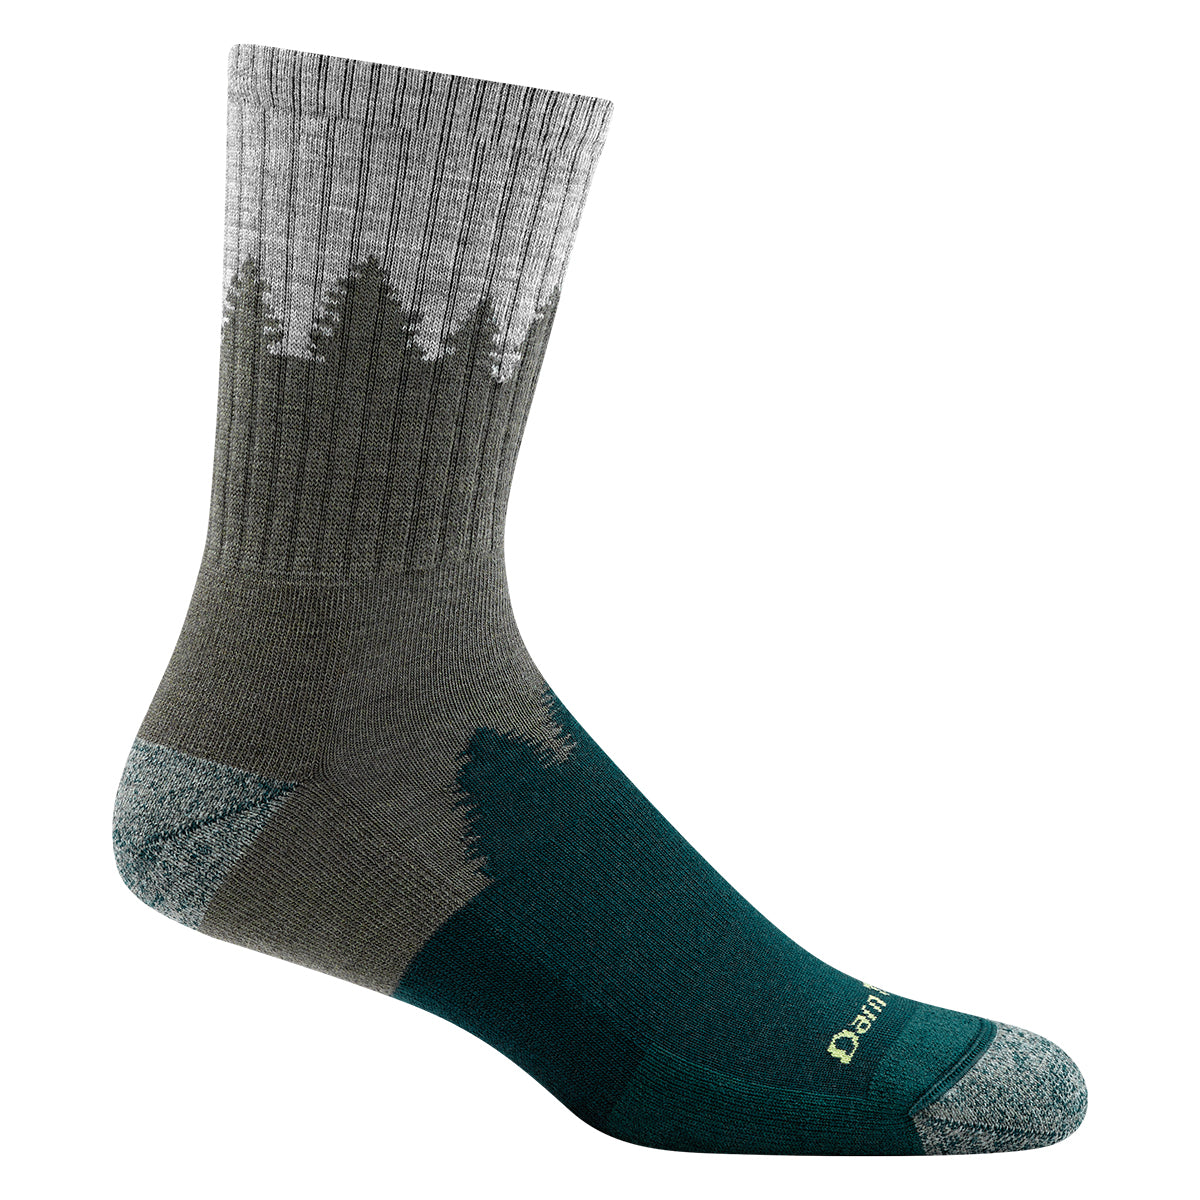 A single gray and teal Darn Tough Number 2 Green Crew men's hiking sock made of merino wool displayed against a white background.